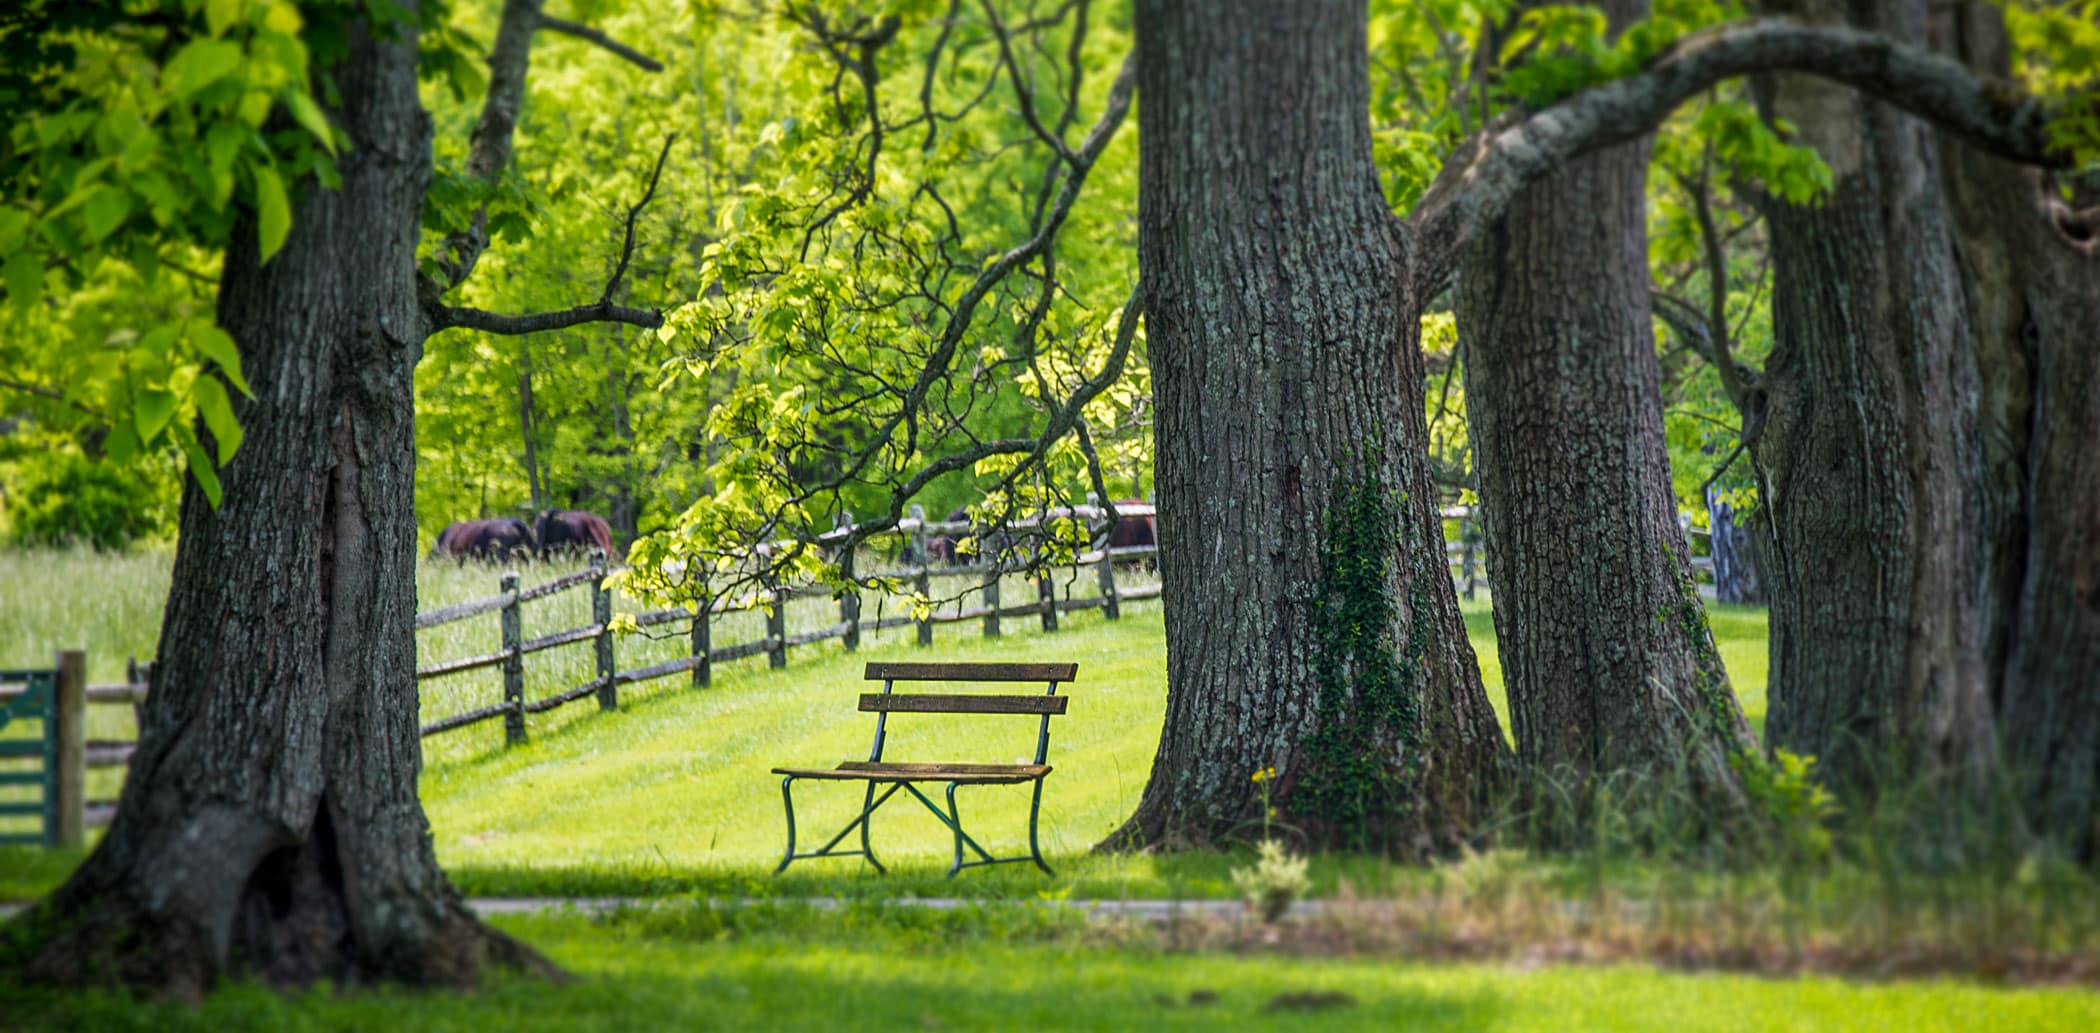 Bench in shade next to large tree, with cow pastures in background